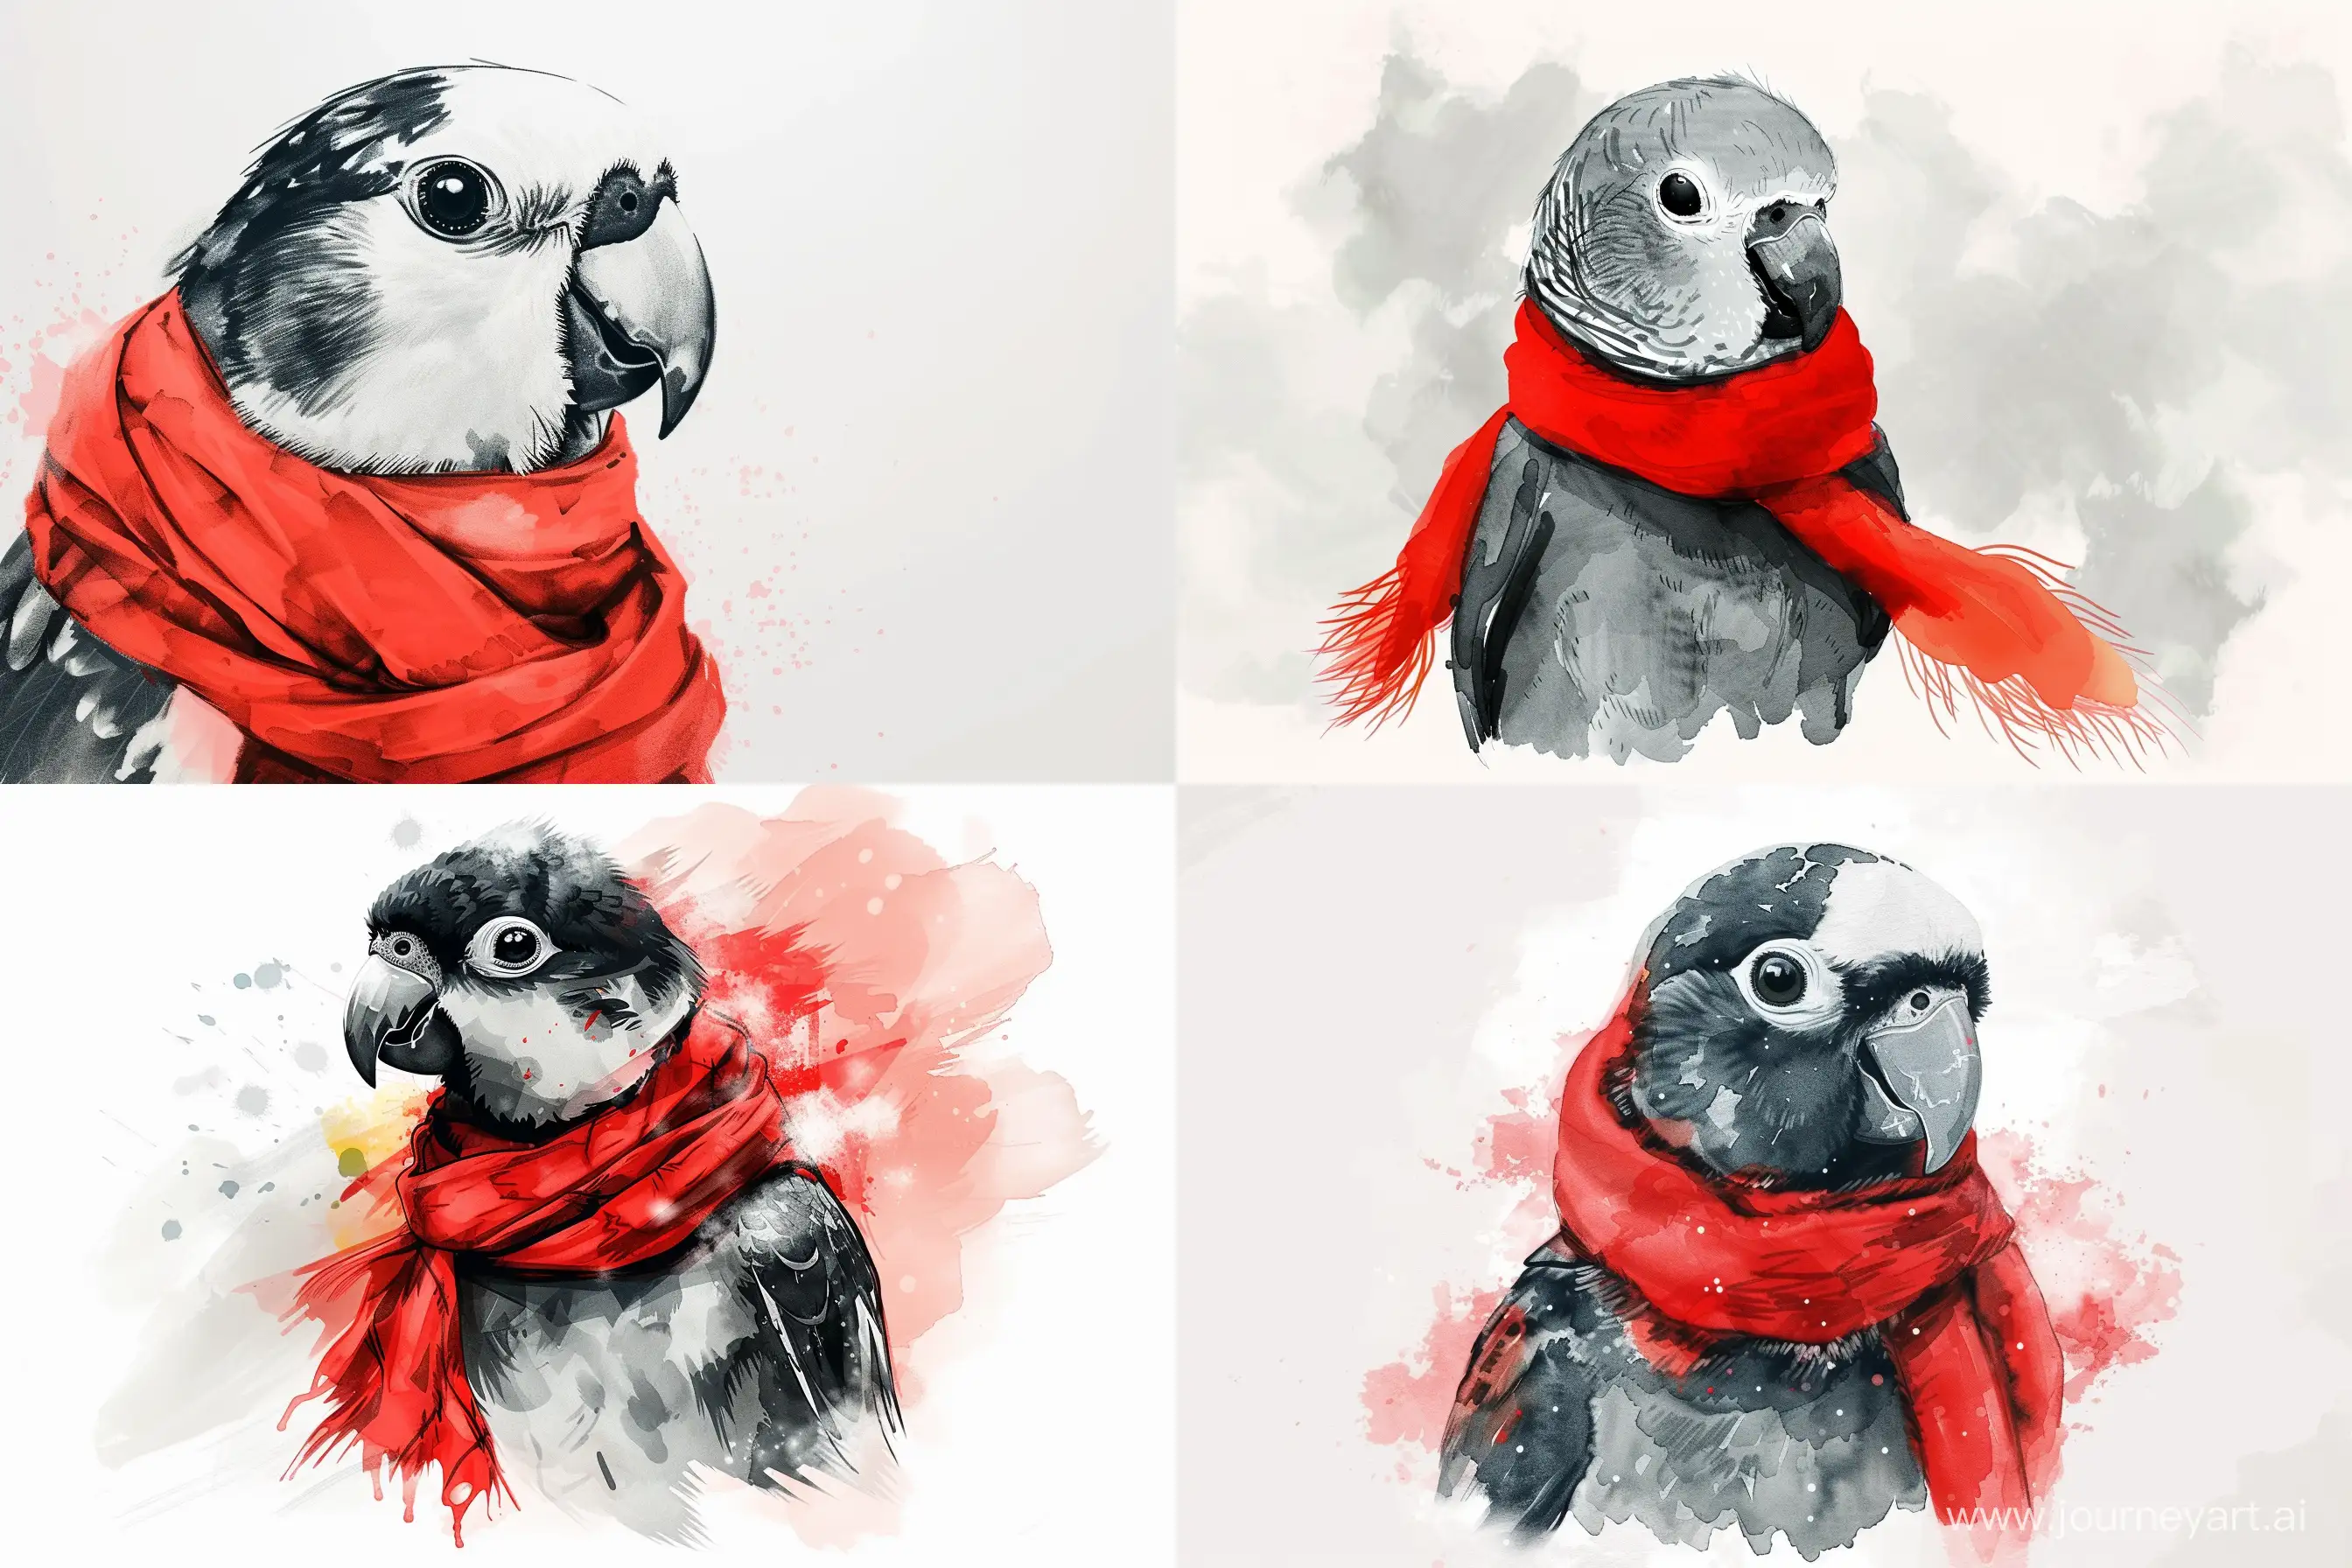 Charming-Black-and-White-Cartoon-Baby-Parrot-with-Red-Scarf-in-Detailed-Watercolor-Style